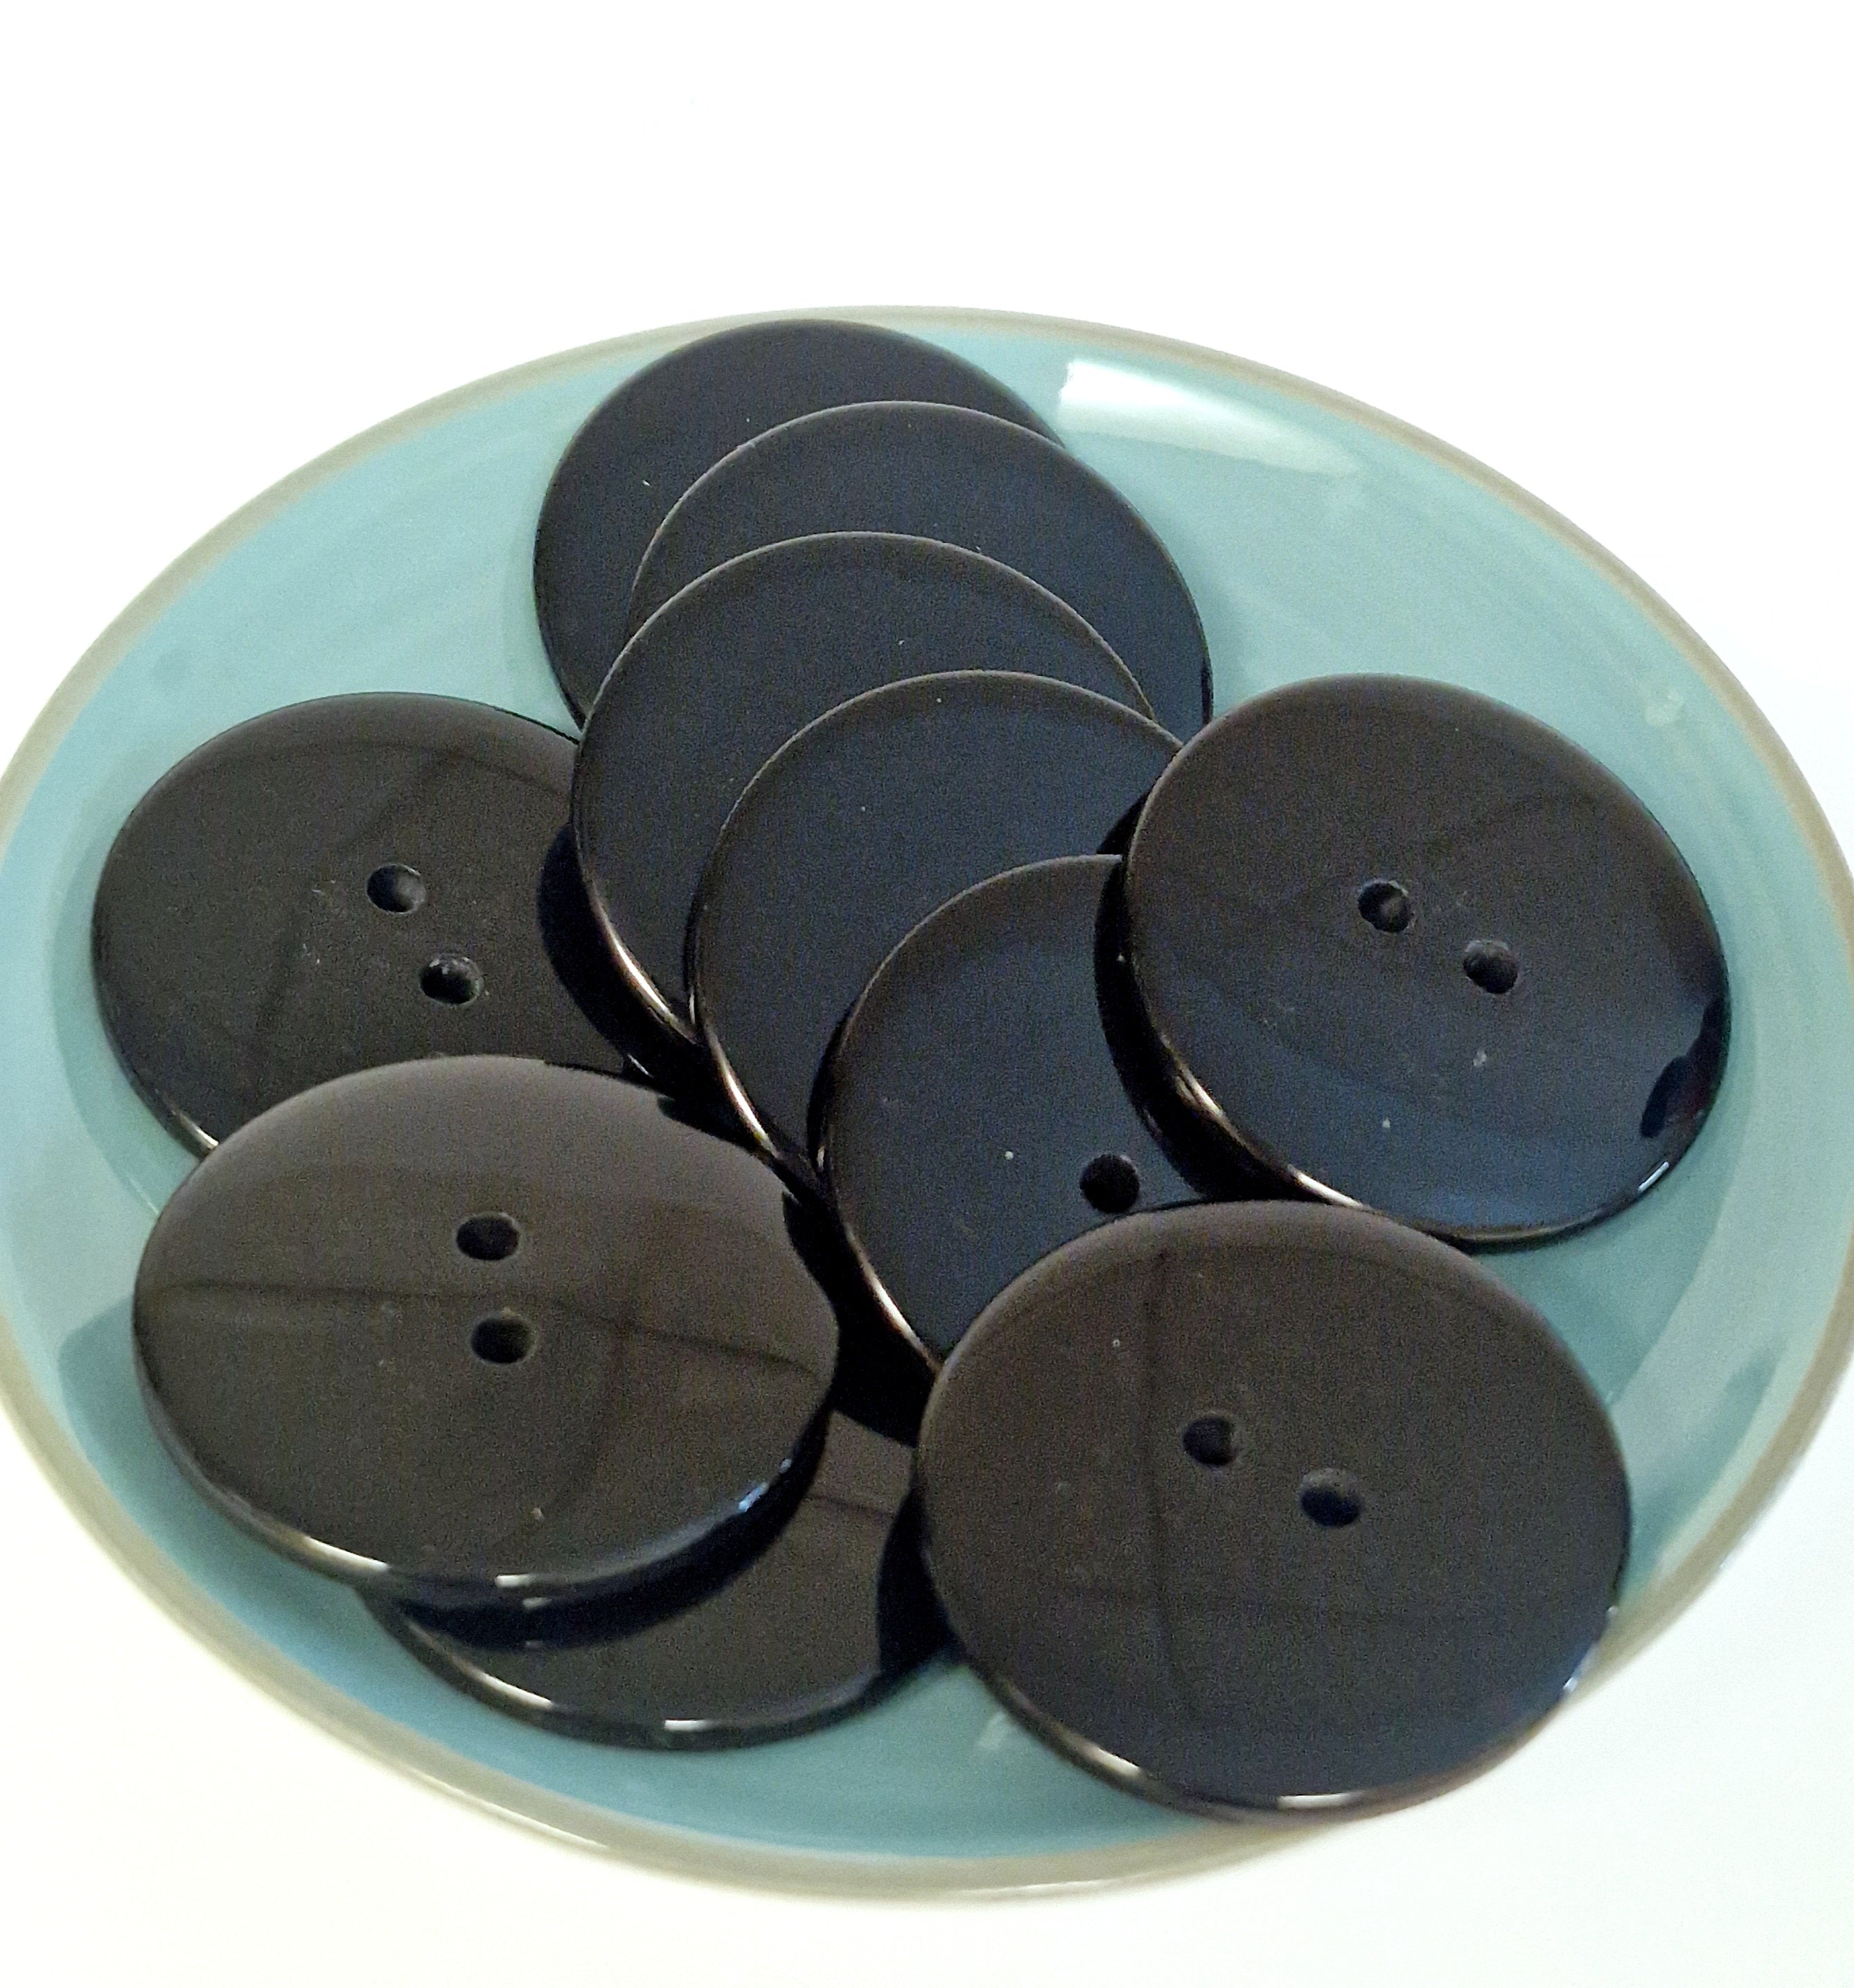 MajorCrafts 8pcs 34mm Black 2 holes Large Round Resin Sewing Buttons